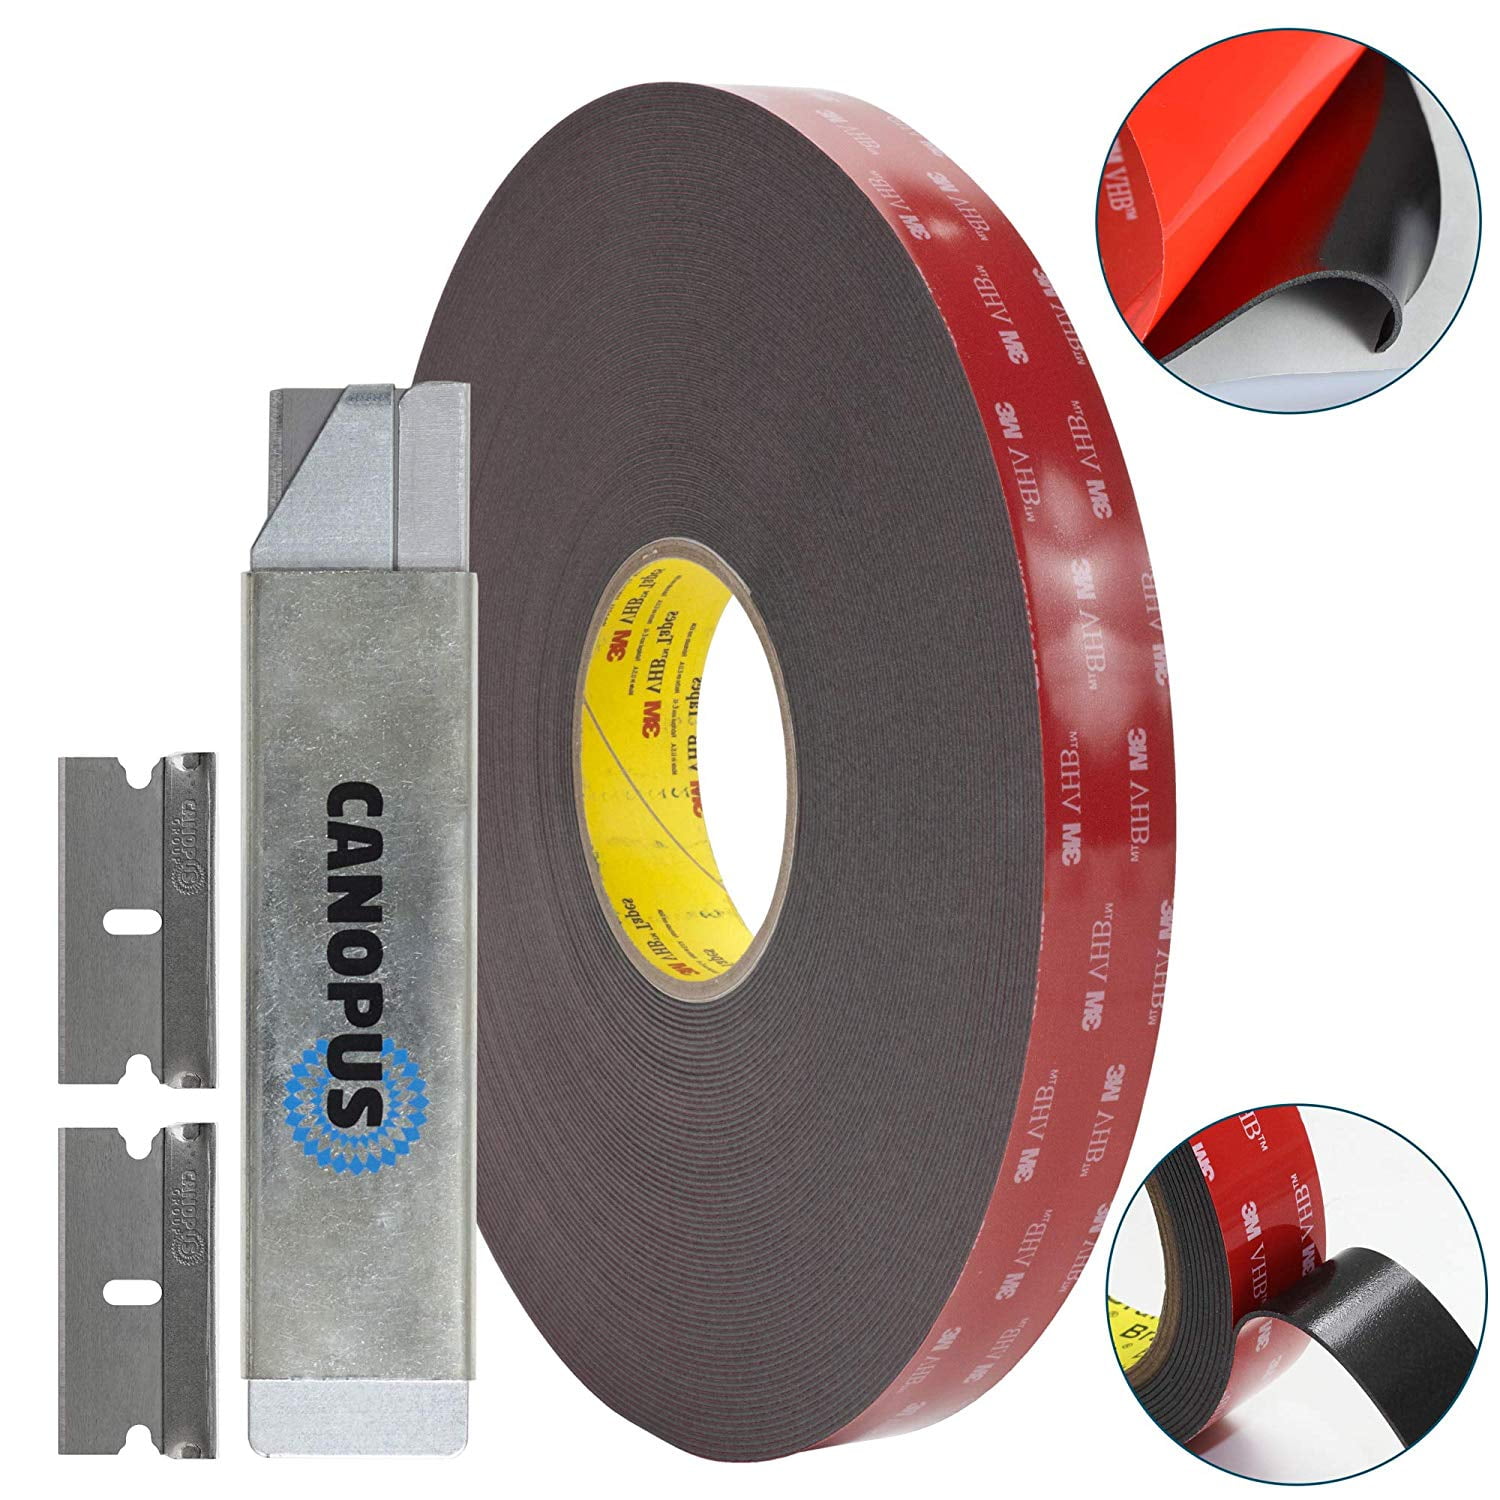 3M 2" x 36 ft  VHB Double Sided Foam Adhesive Tape 5952 Automotive Mounting US 